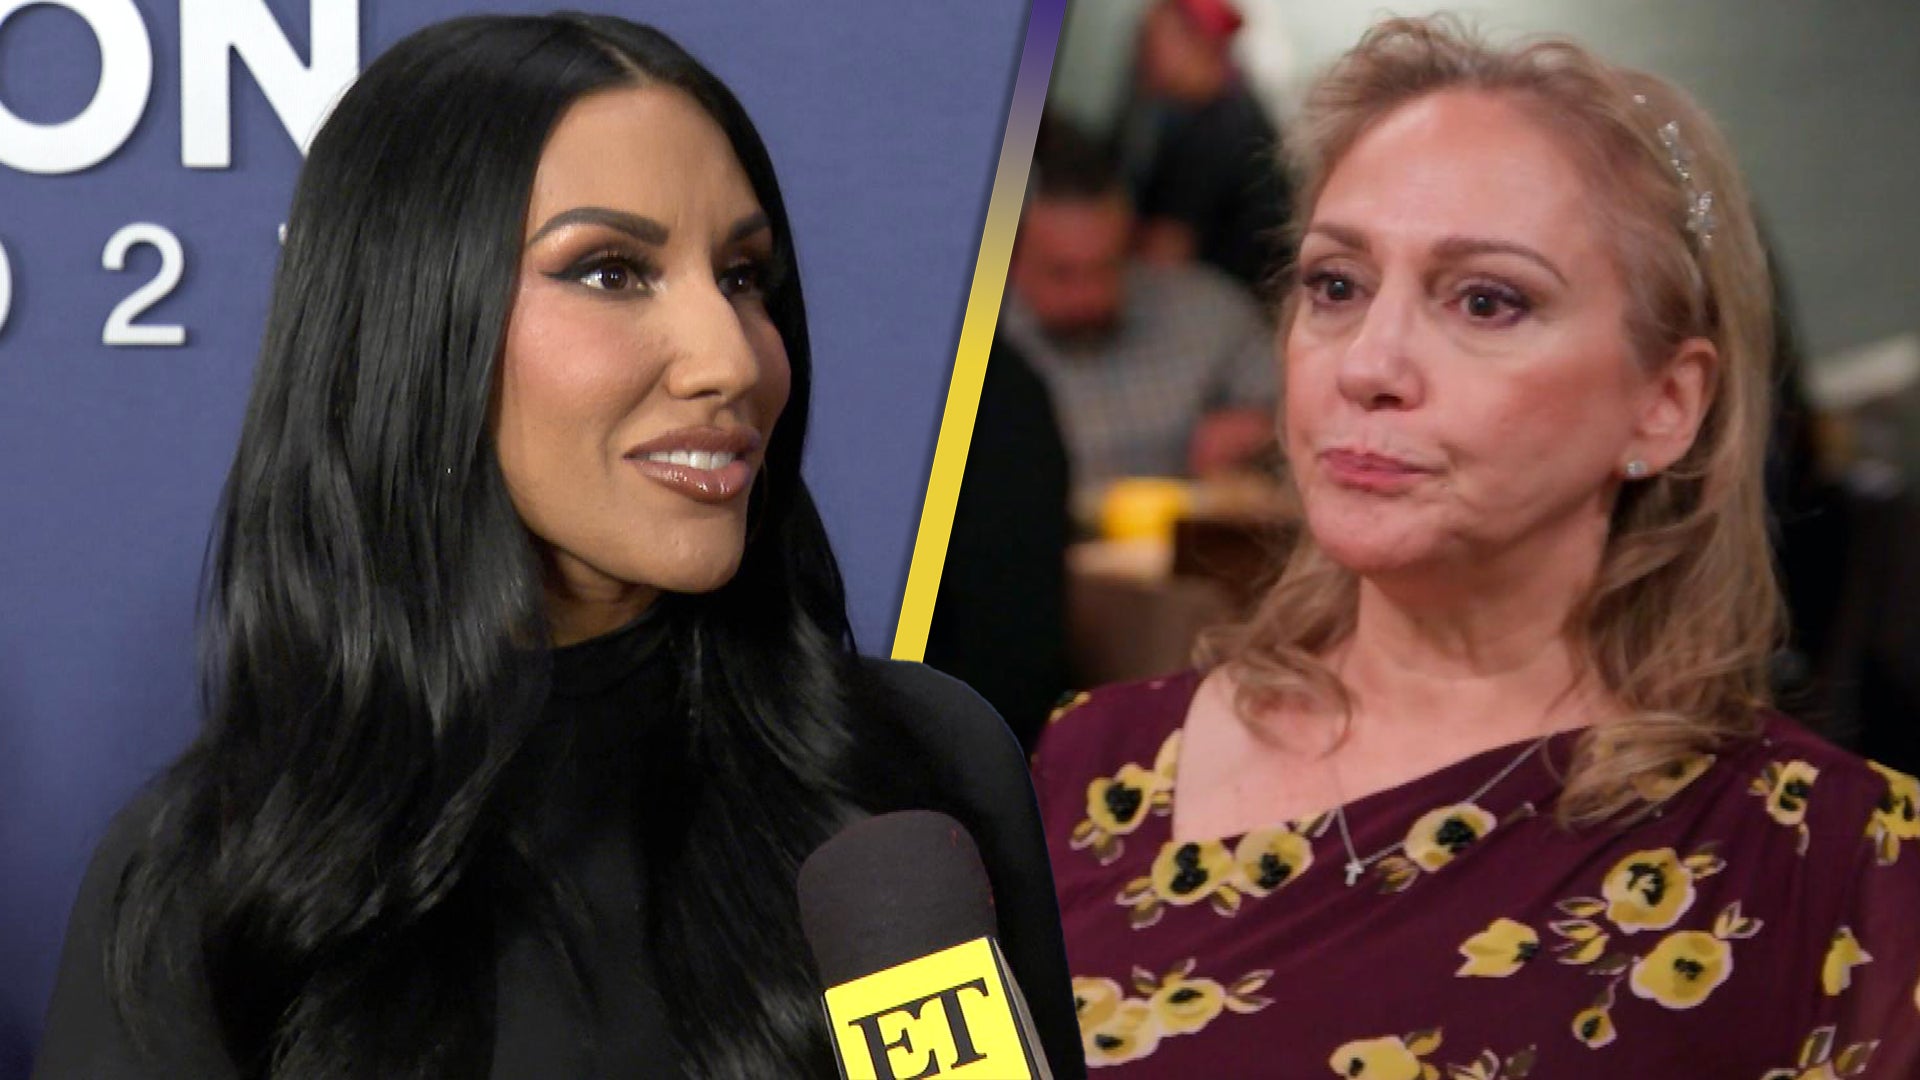 Monica Garcia Addresses Her Mom Liking 'Nasty' Social Media Comments About Her After 'RHOSLC' Drama  